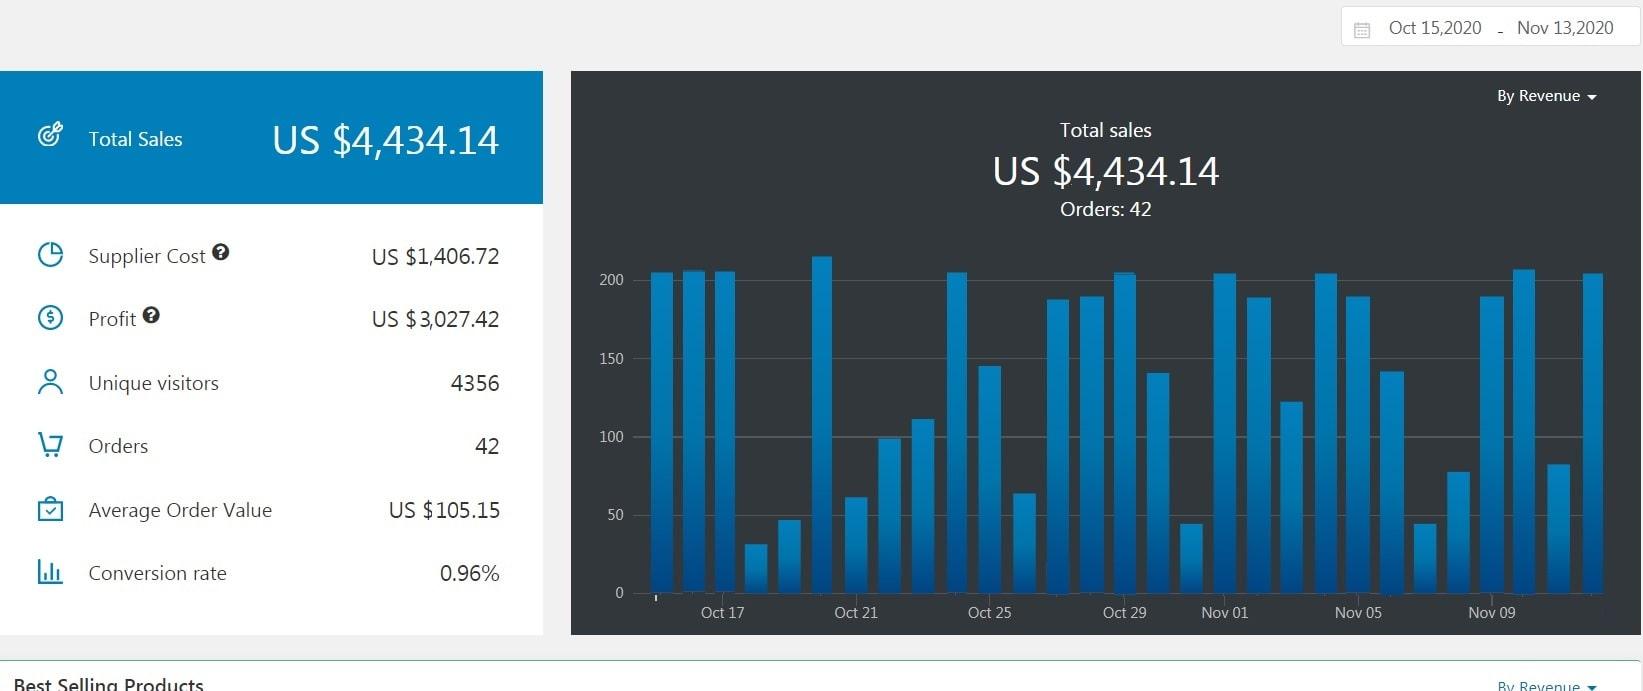 A screenshot showing the performance of a successful home-based business with $4,434.14 in total monthly sales